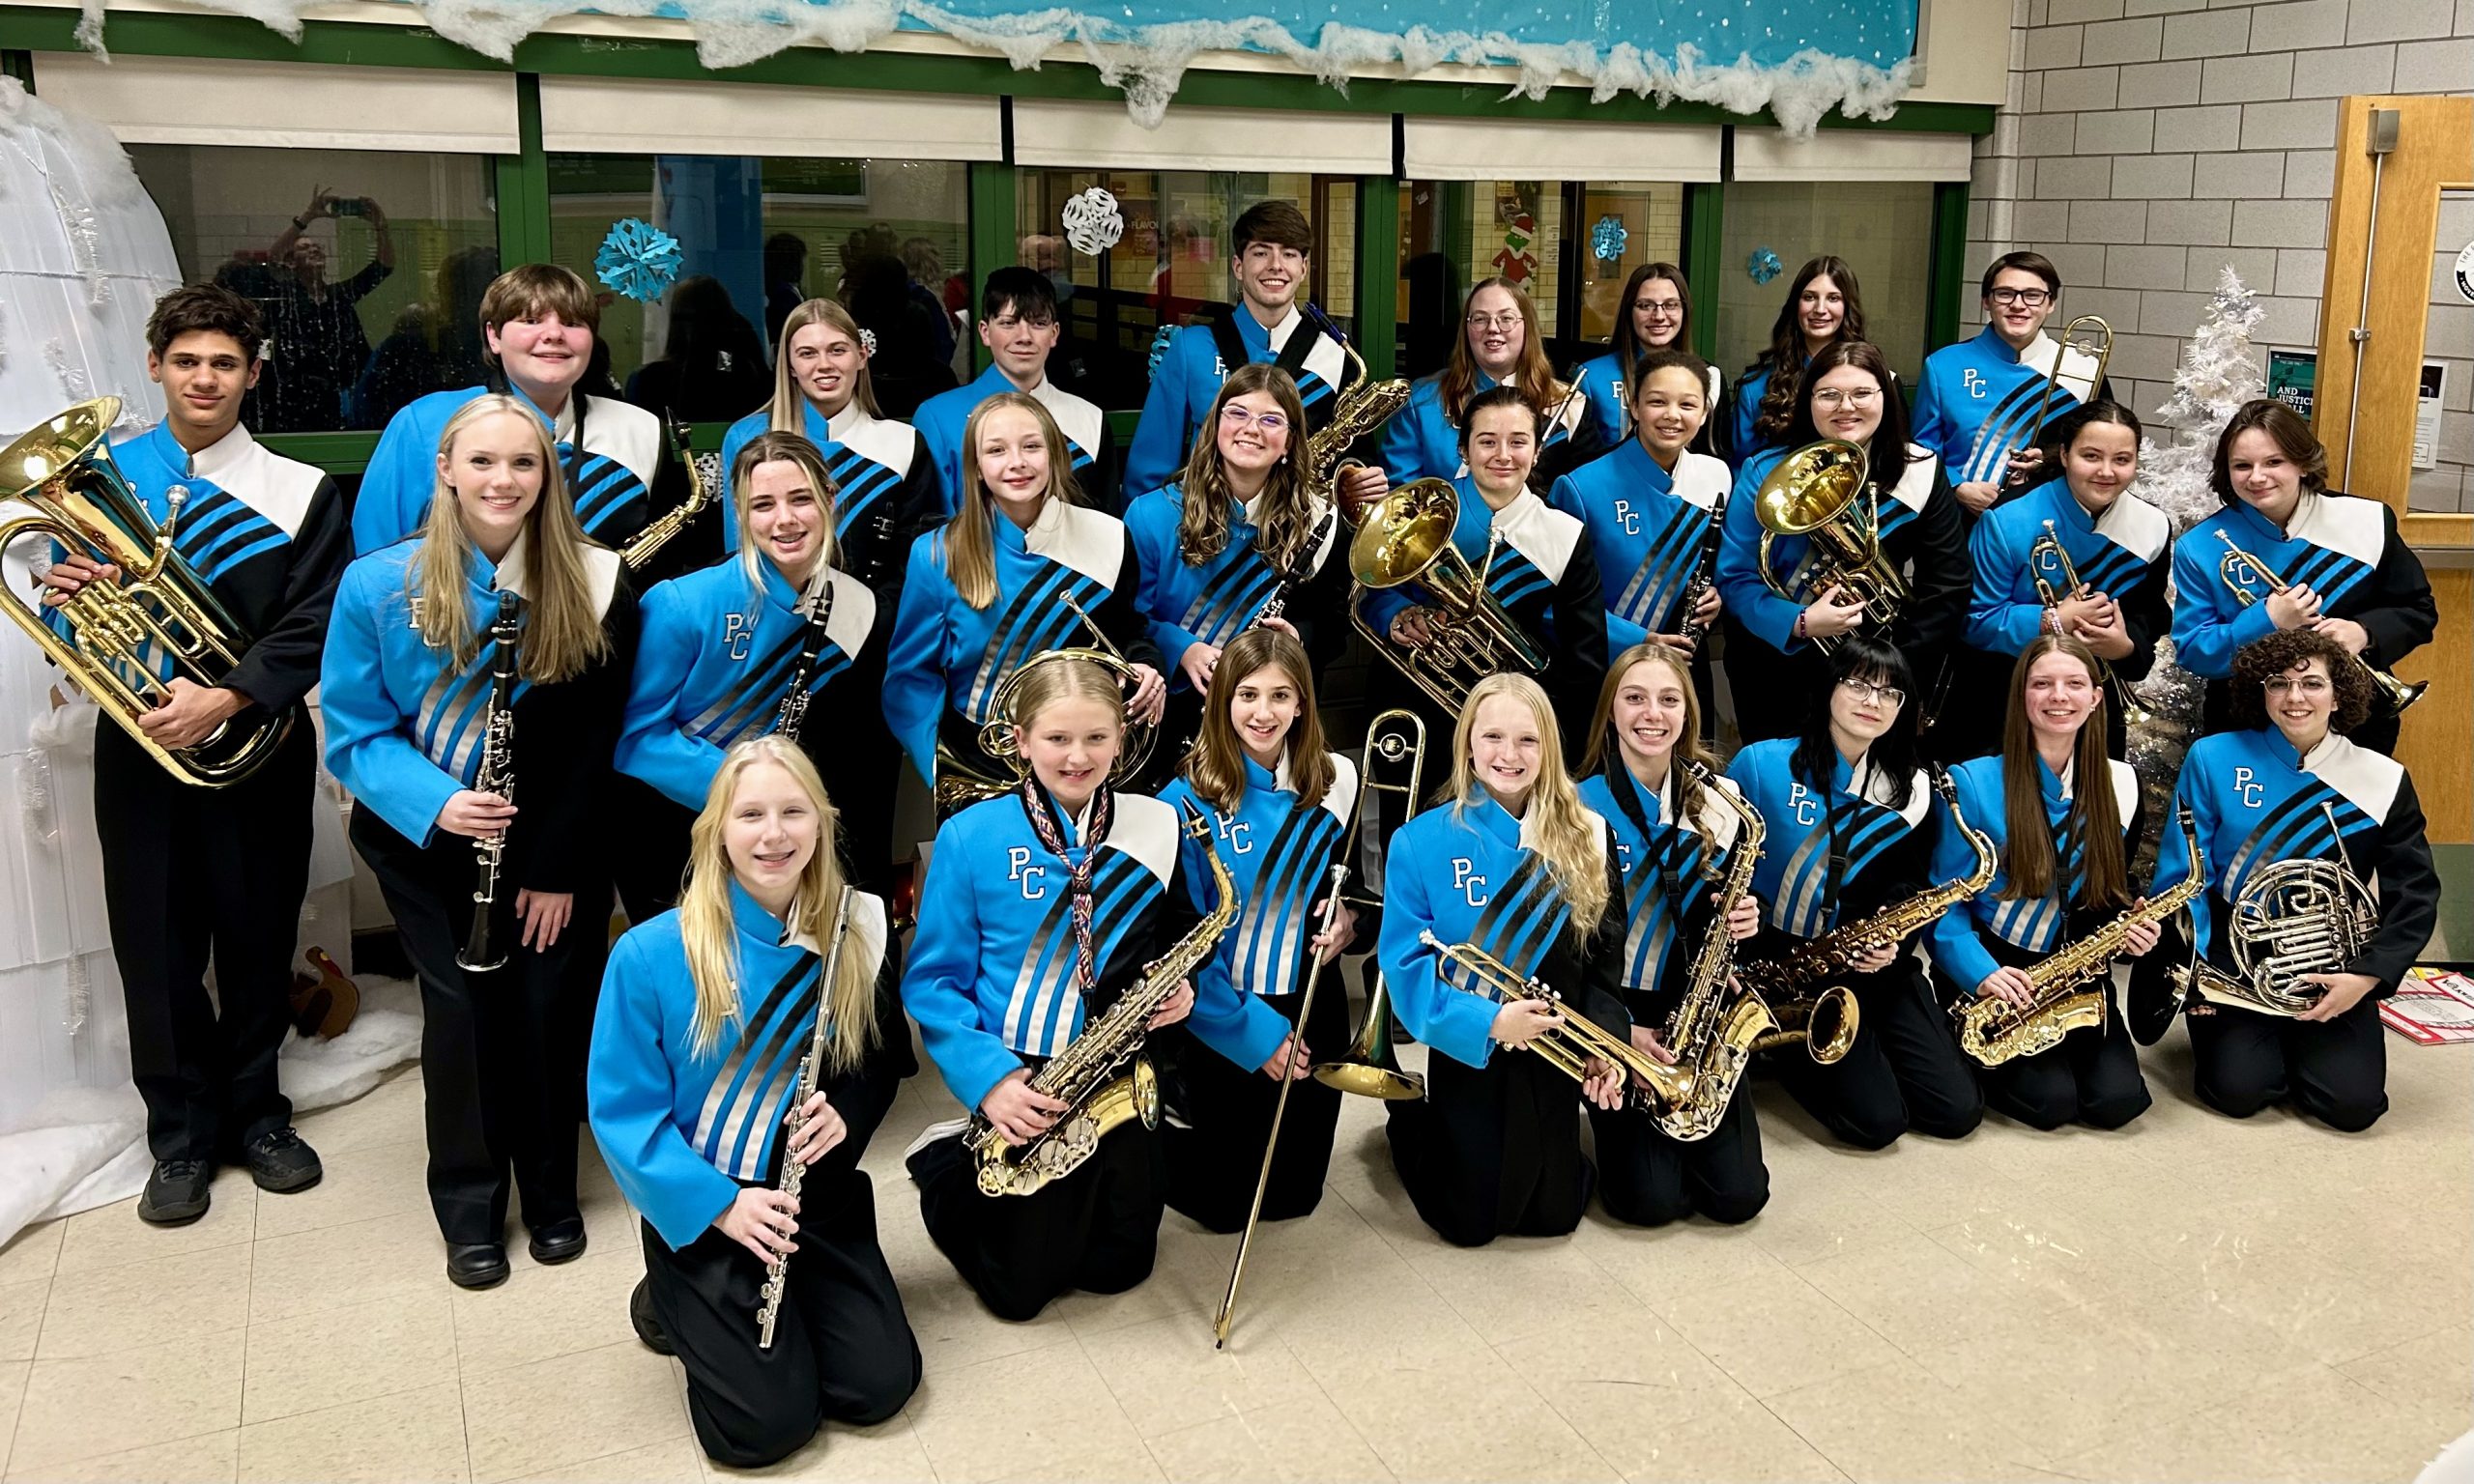 Congratulations to these 26 students for their participation in Cambria County Honor Band!